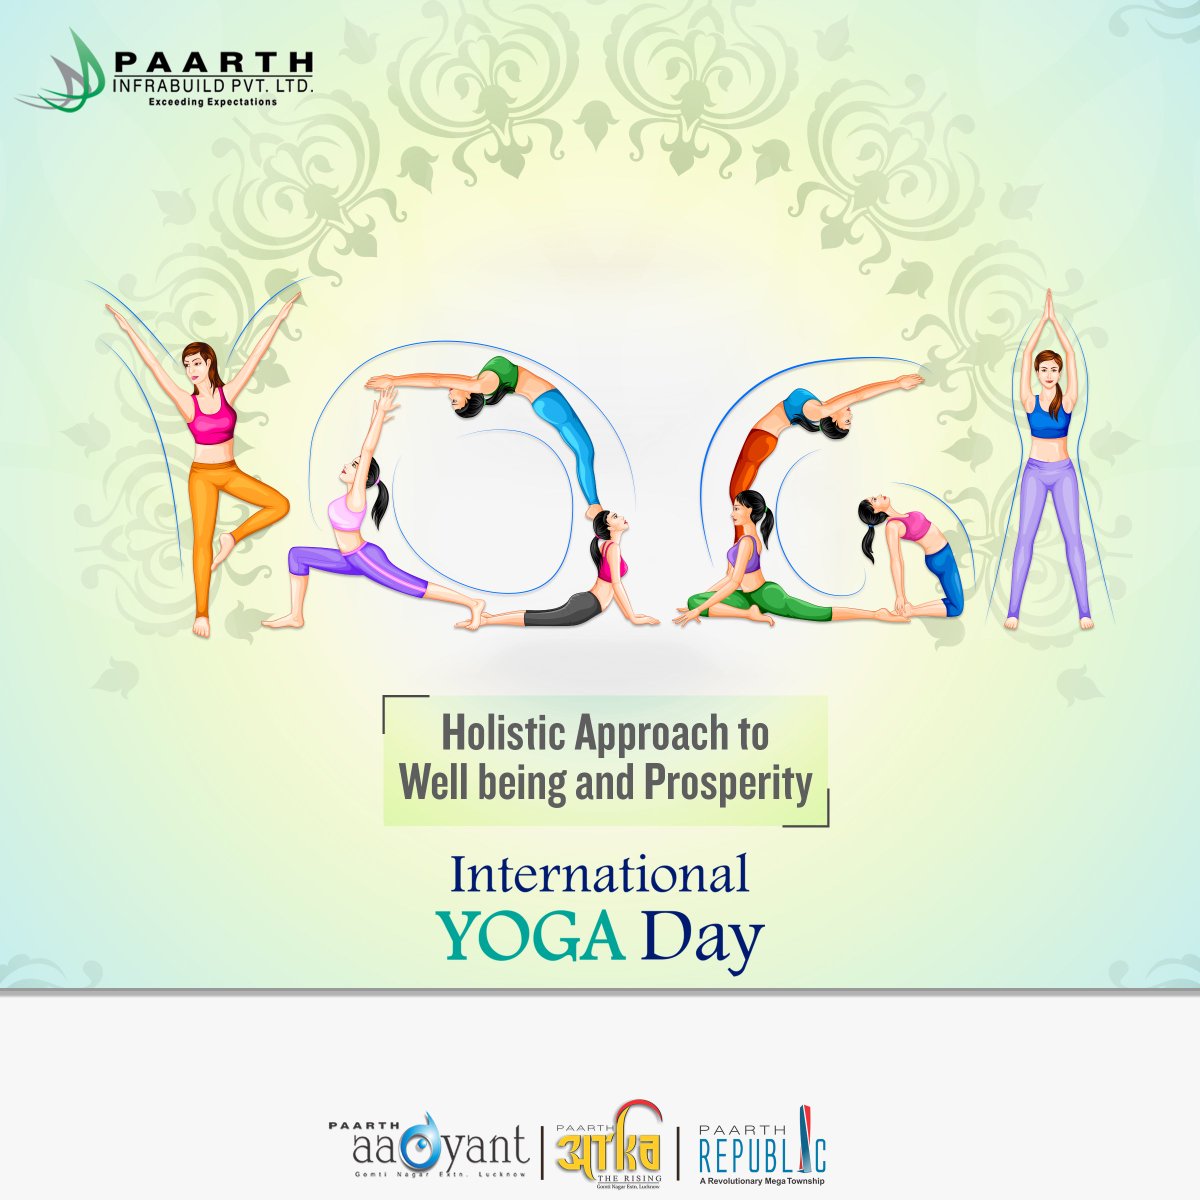 On this International Yoga Day, Paarth wishes everyone a Healthy Body, A Healthy Mind and A Healthy Soul. #LetsDoYoga 

#StayHealthy #StayHappy #StayPeaceful